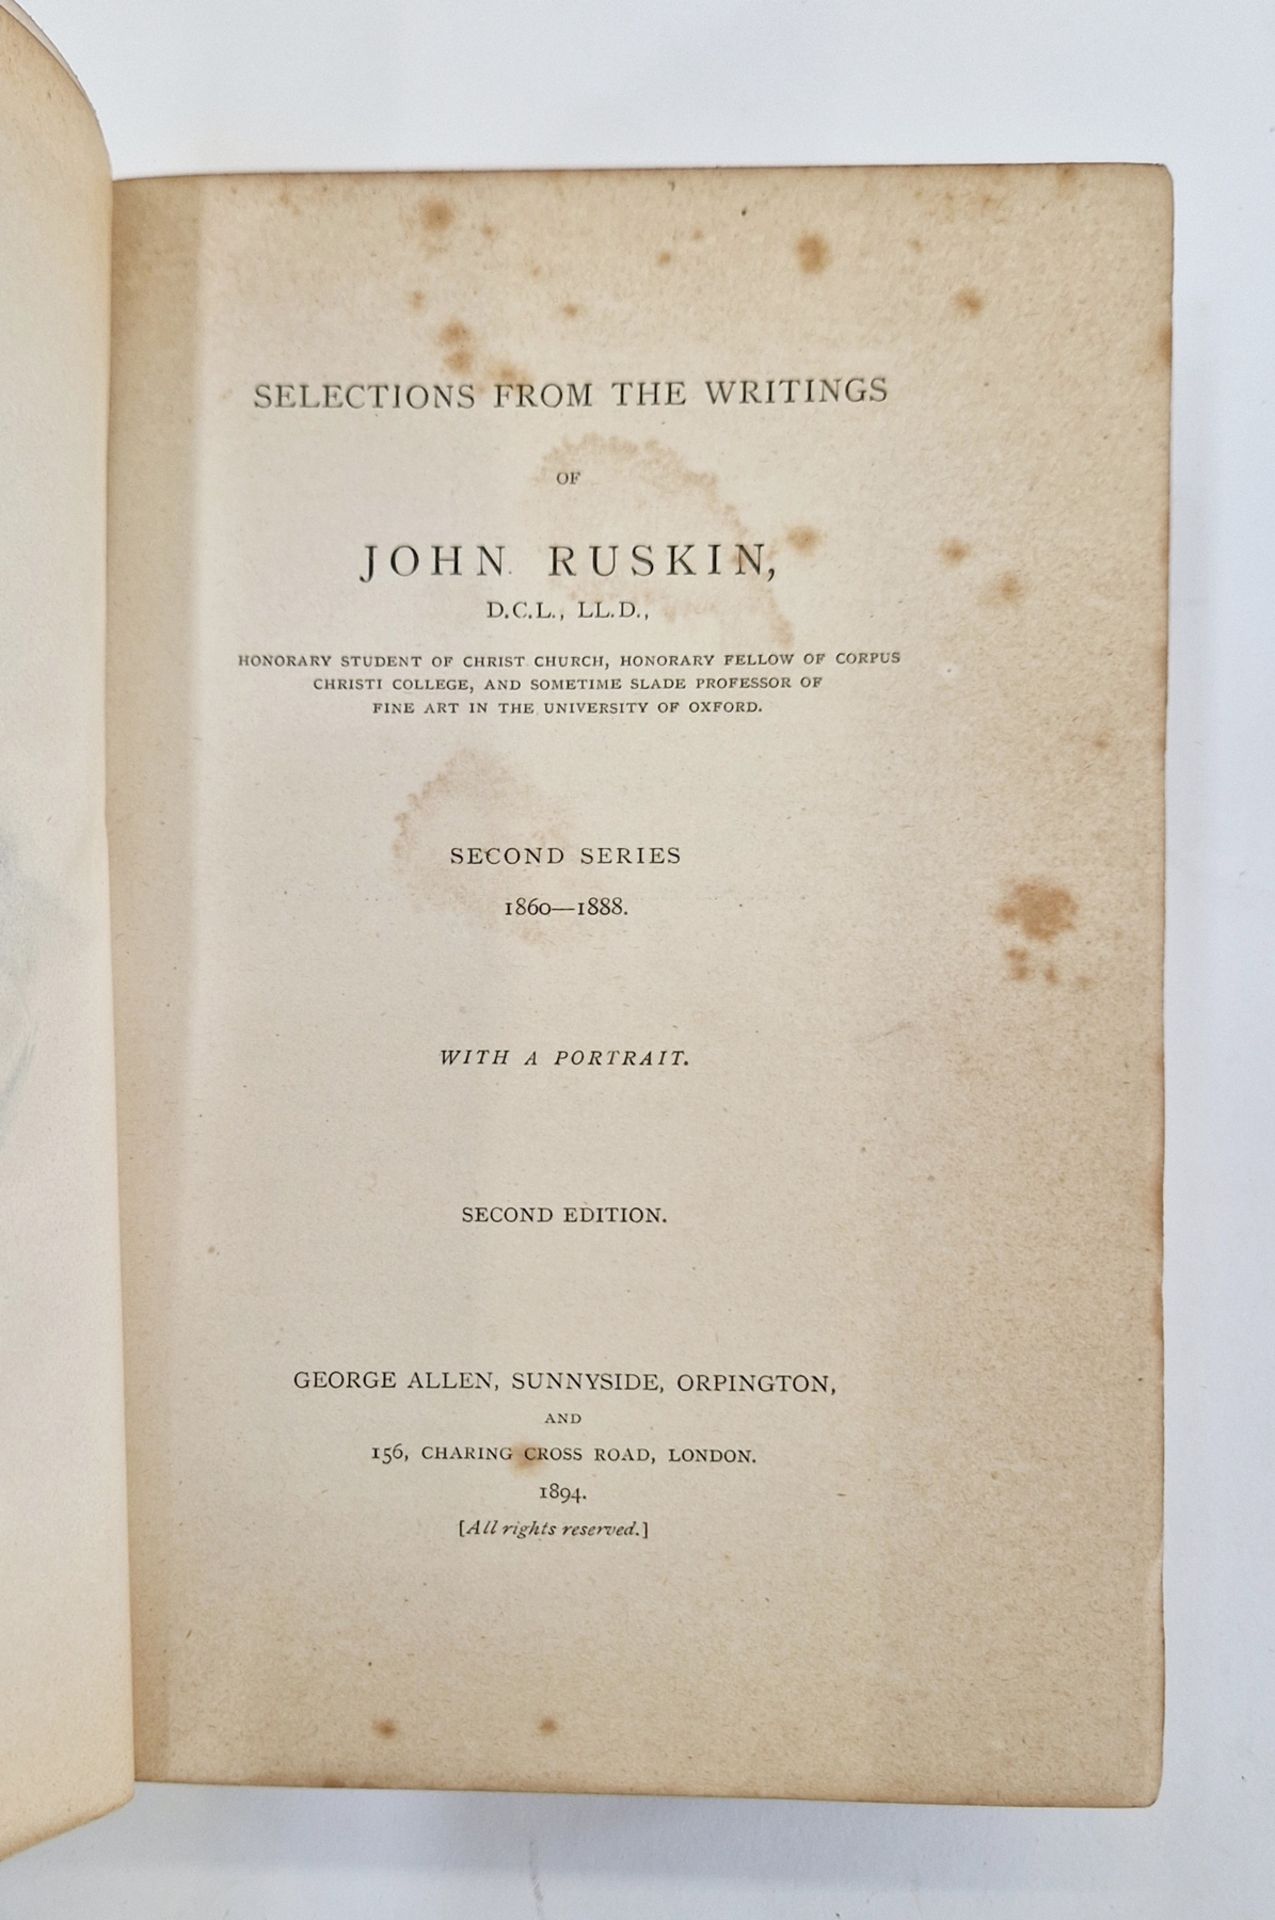 Bindings - Ruskin, John "Selections form the Writings of John Ruskin, First Series 1843-1860" Second - Image 4 of 7